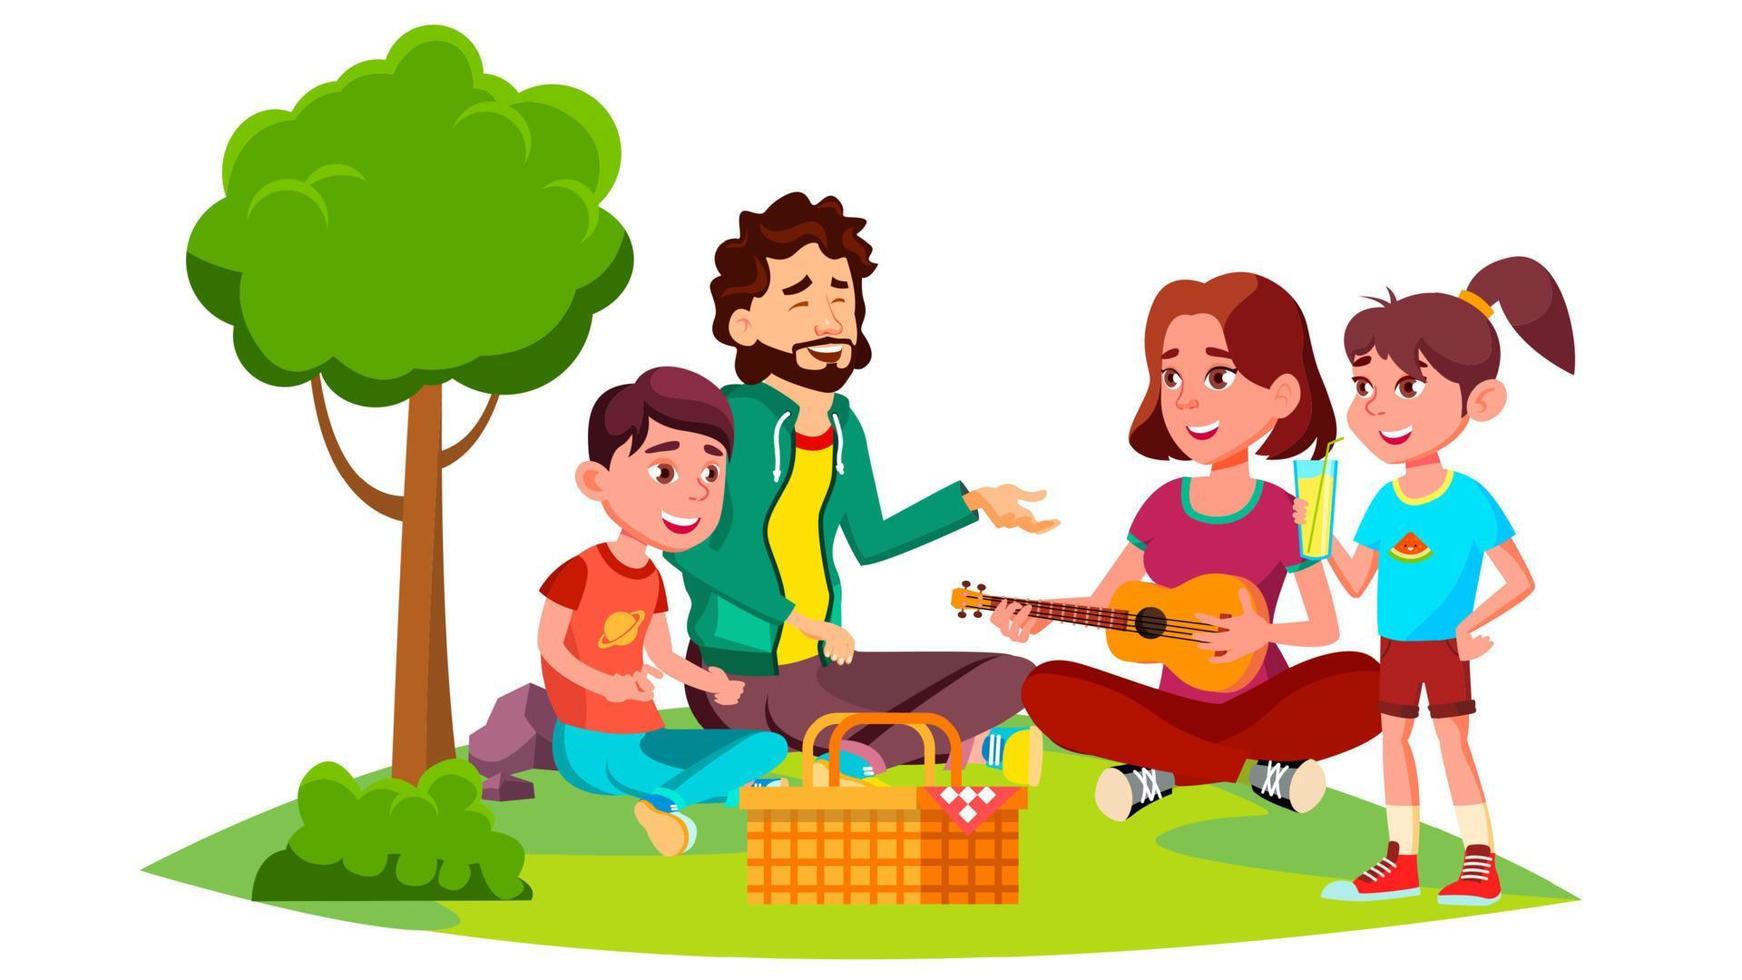 Family With Children On A Picnic In Nature Vector. Isolated Illustration vector